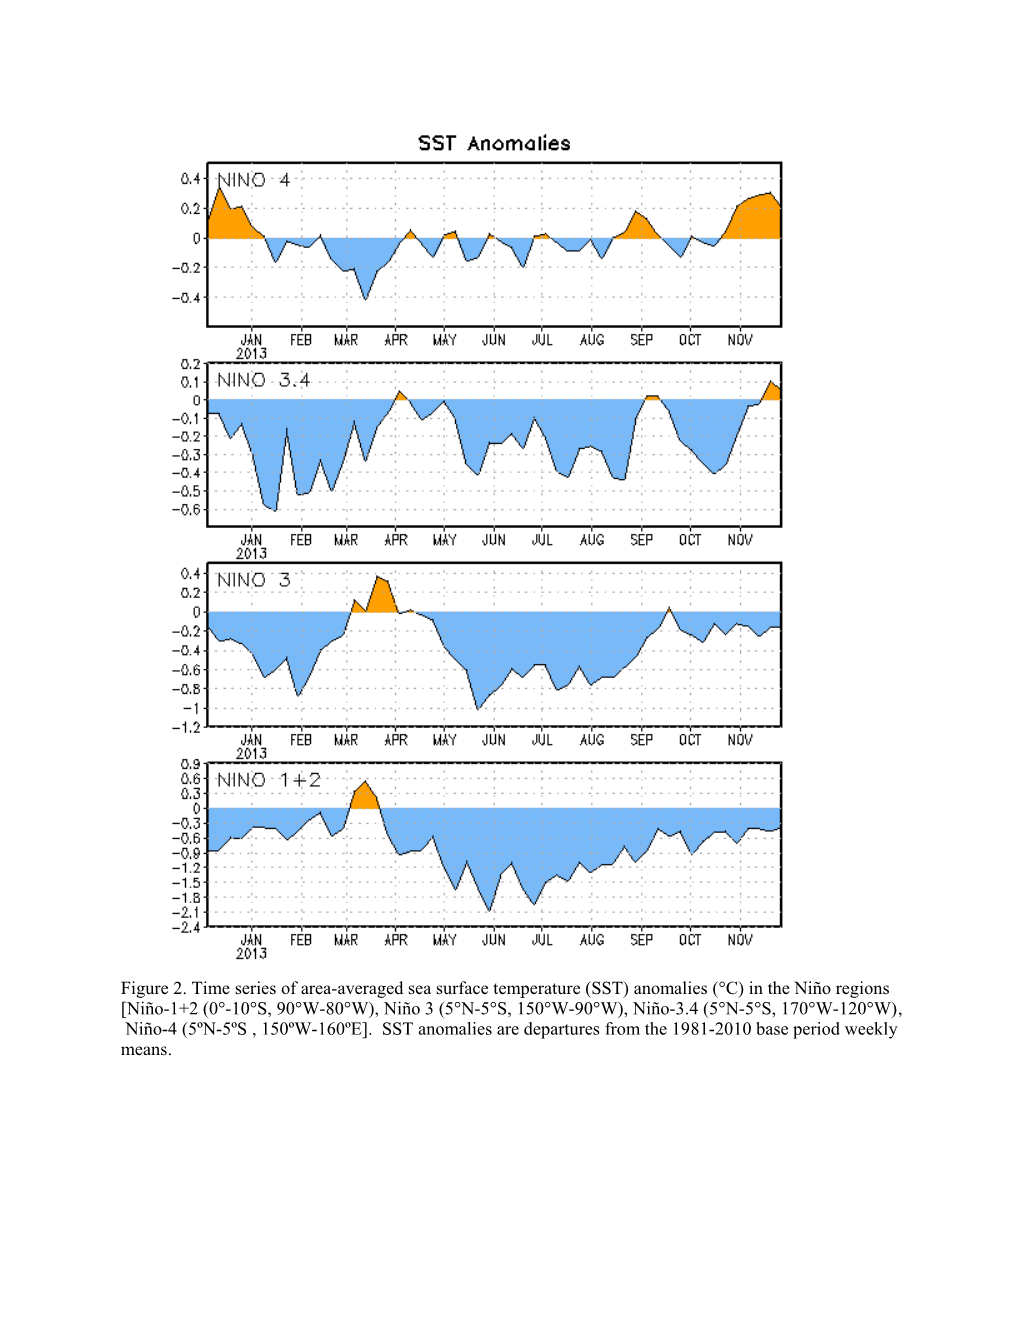 Synopsis: ENSO-Neutral Conditions May Transition to La Niña Co s2